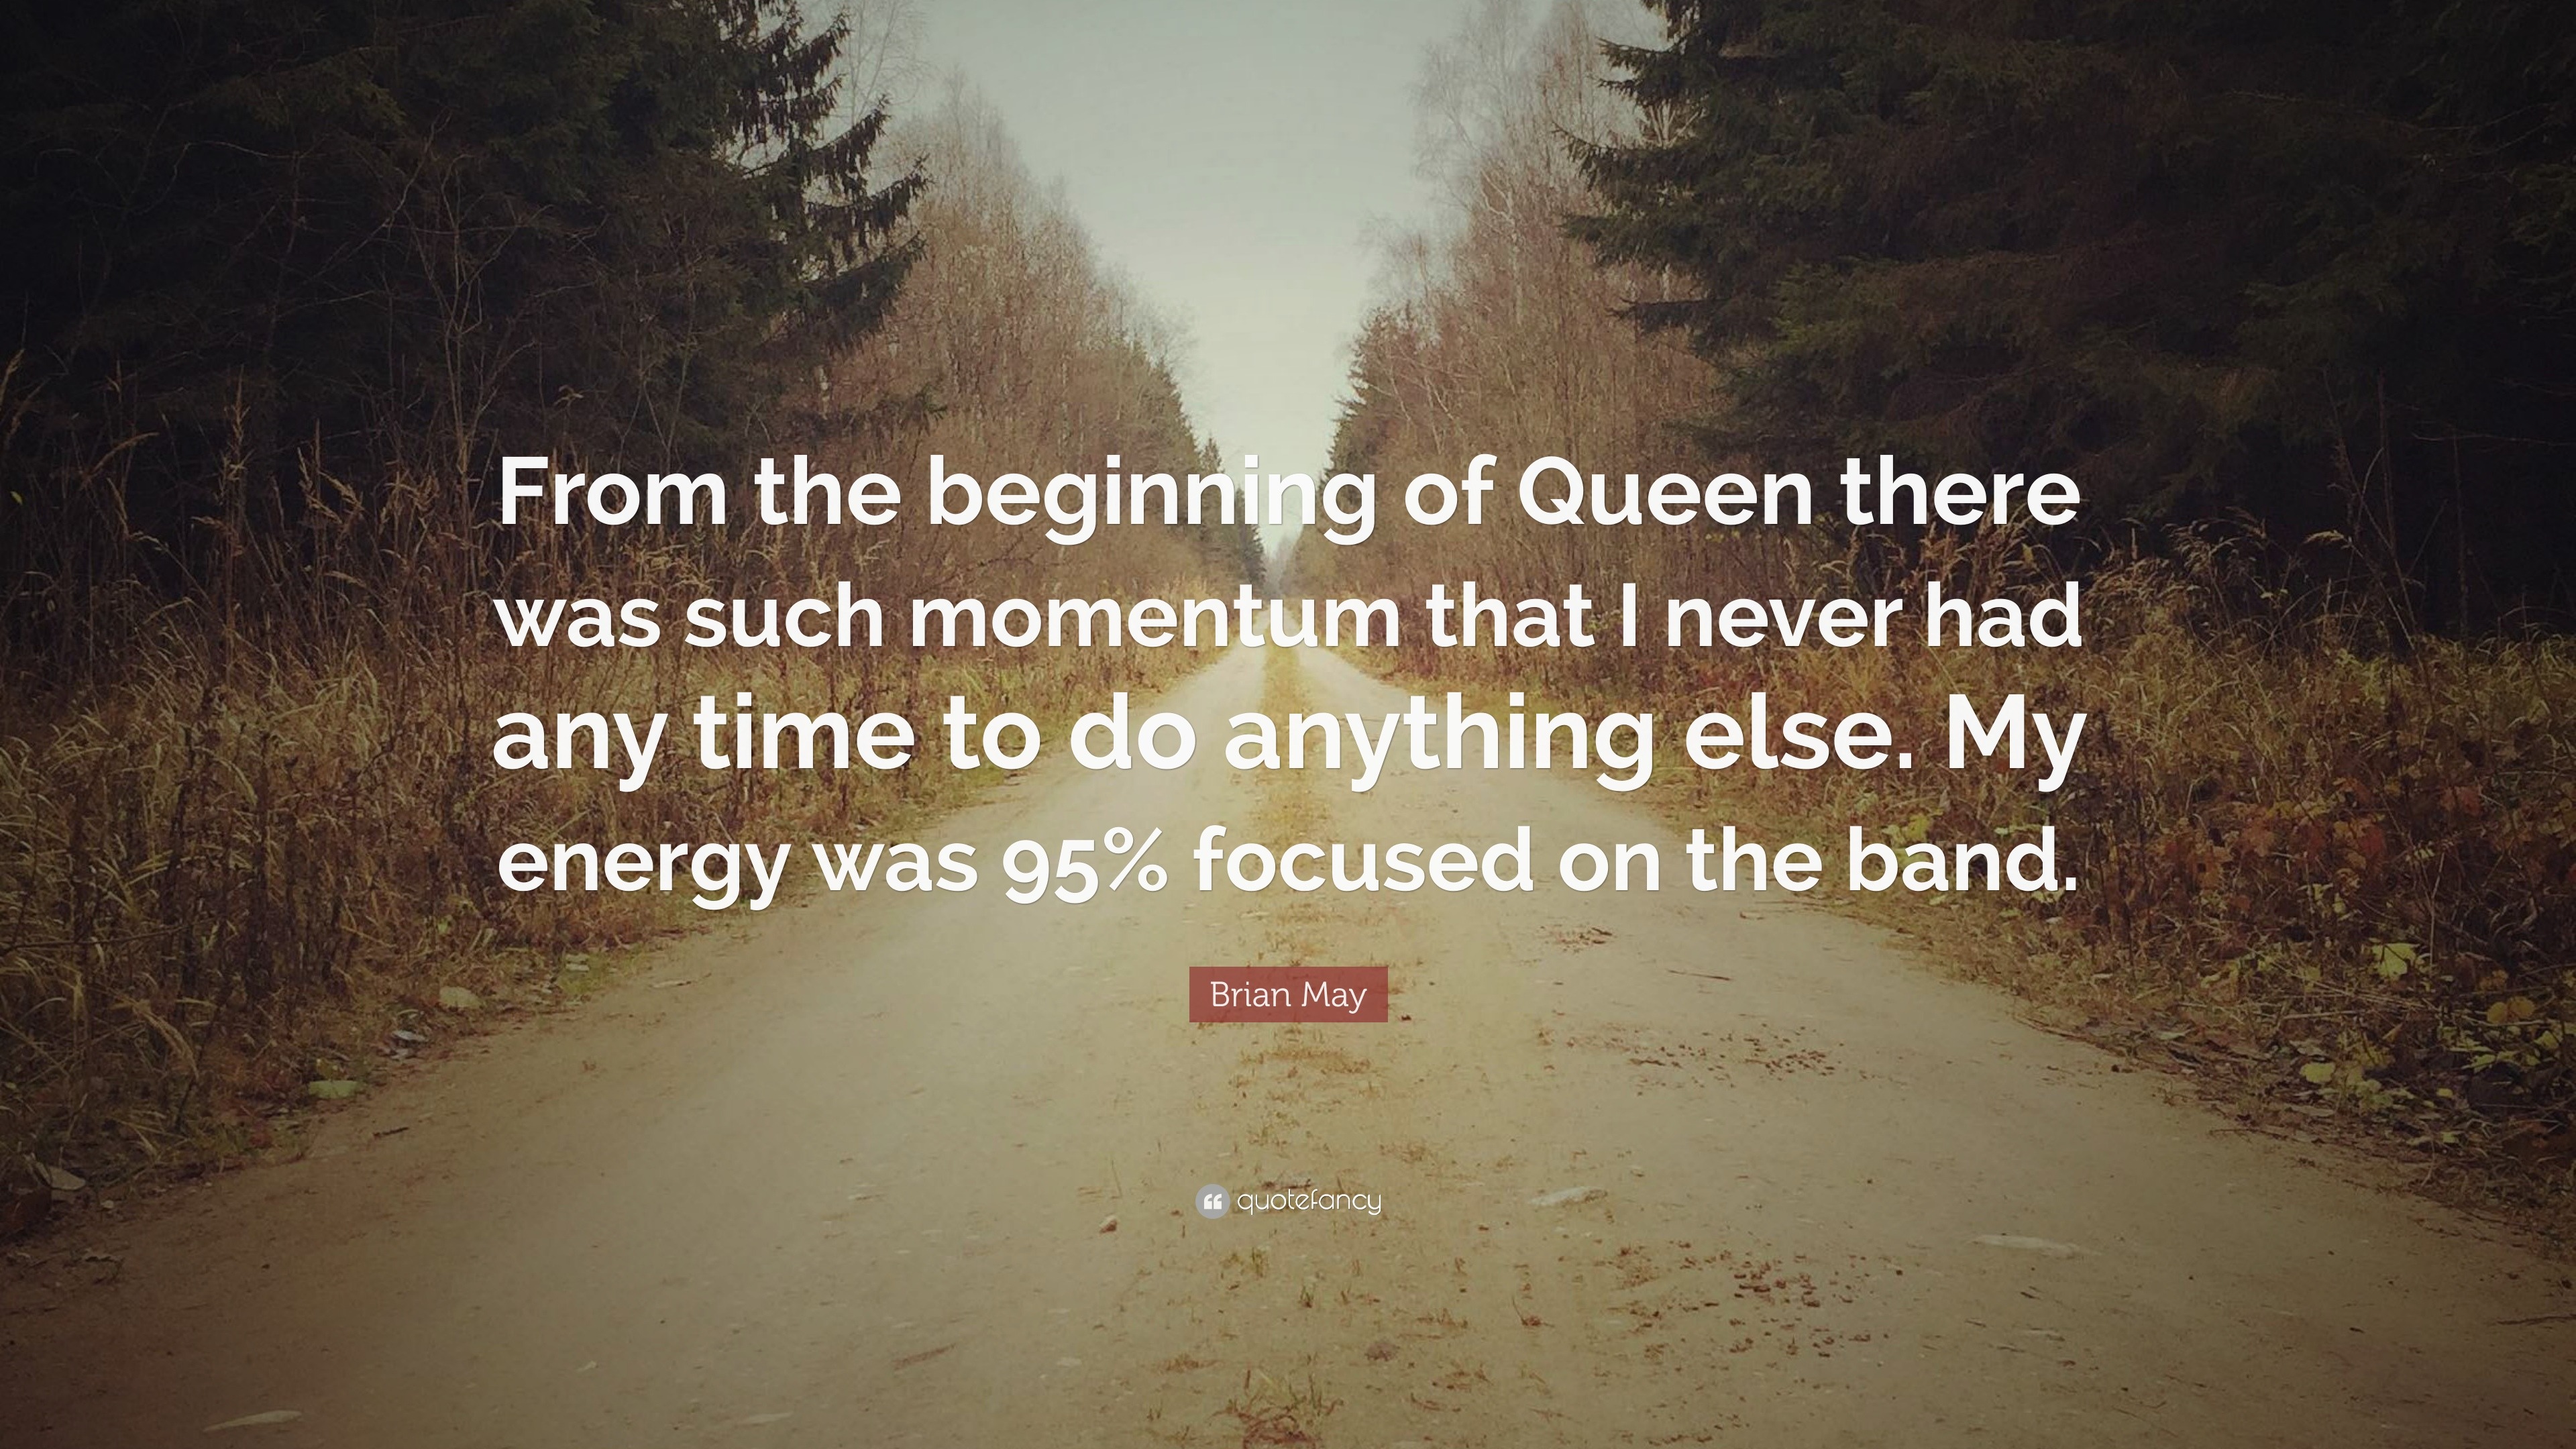 Brian May Quote “from The Beginning Of Queen There Was Such Momentum That I Never Had Any Time